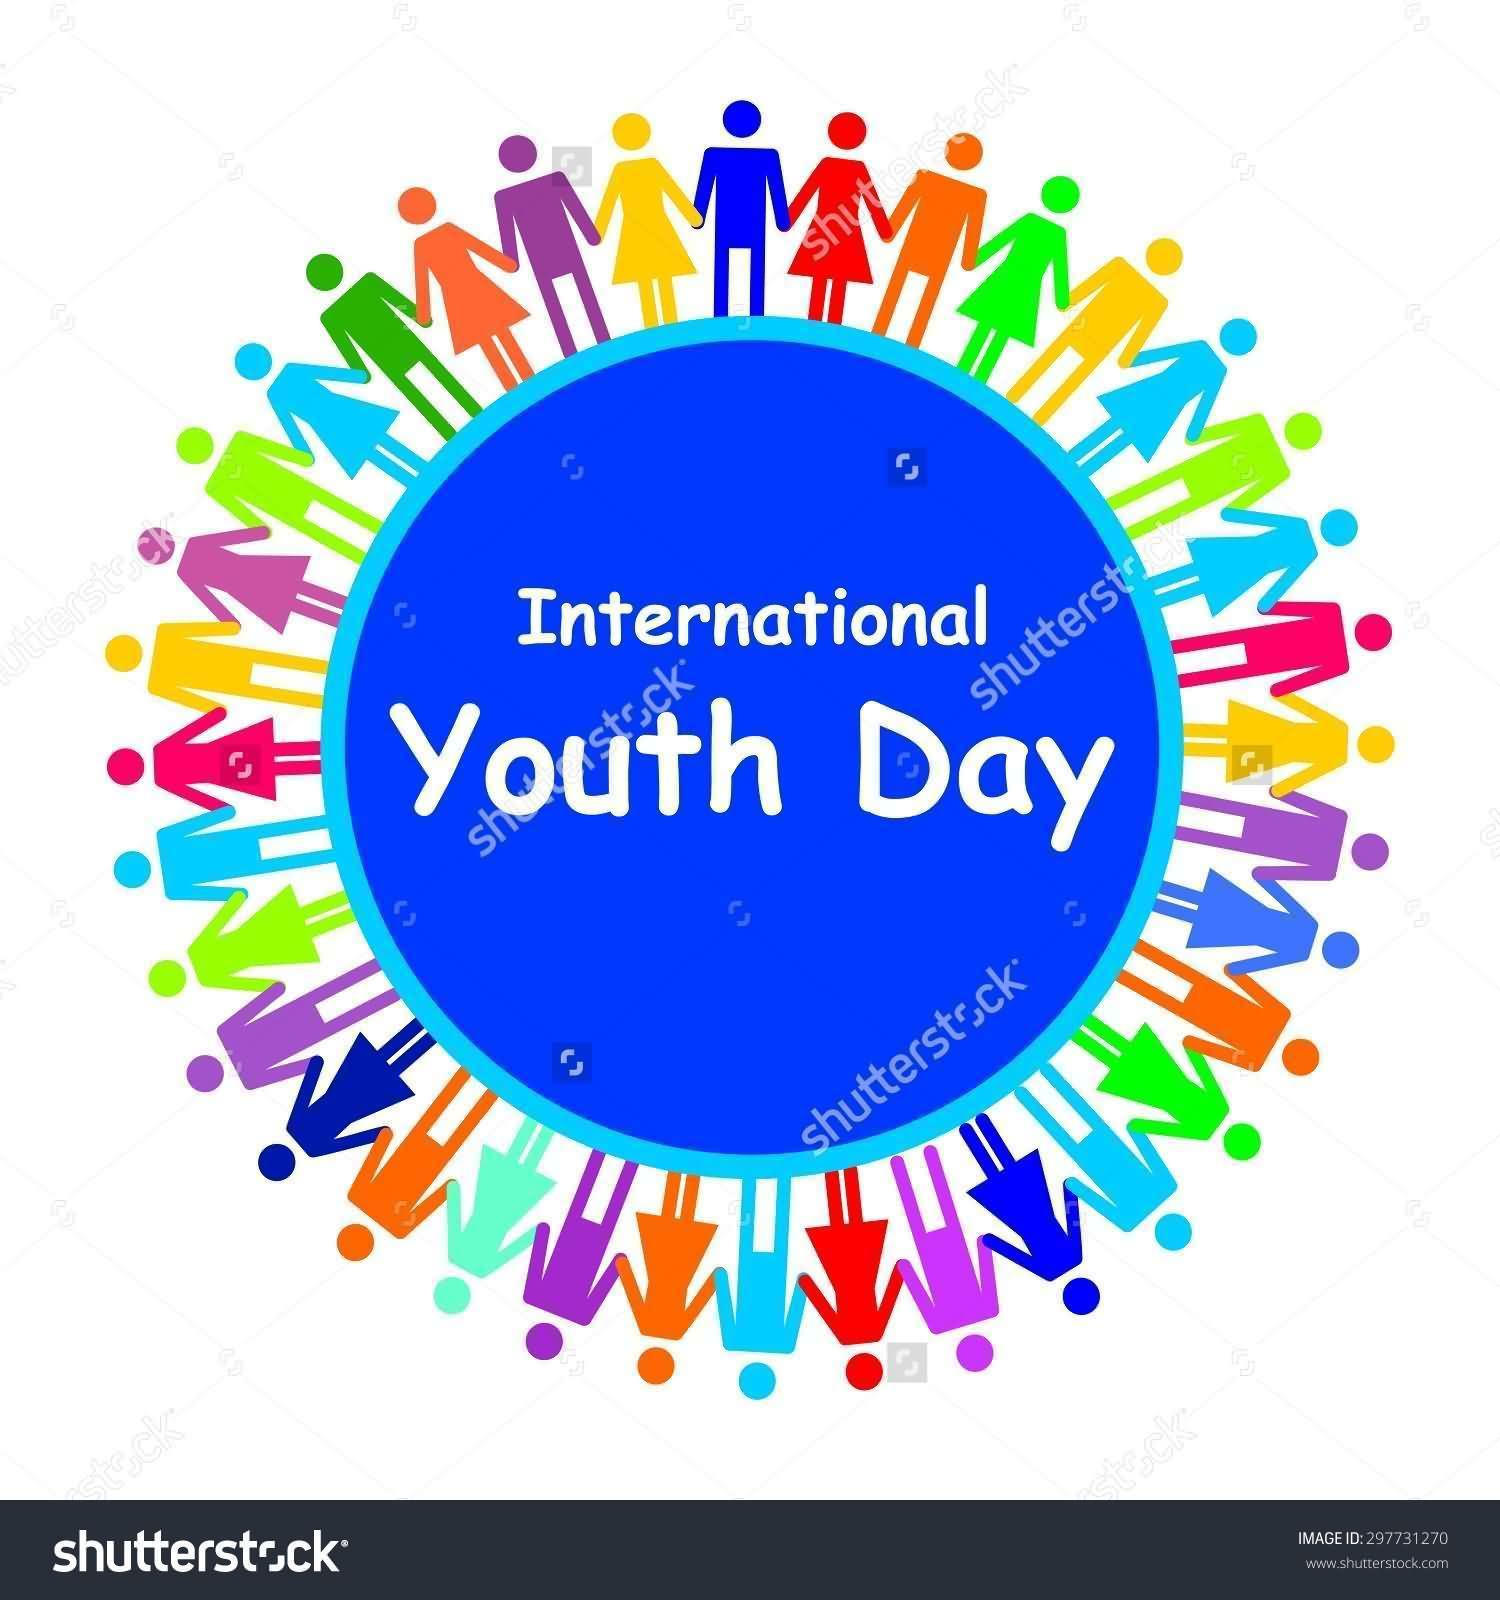 International Youth Day Colorful Silhouette People Vector Illustration